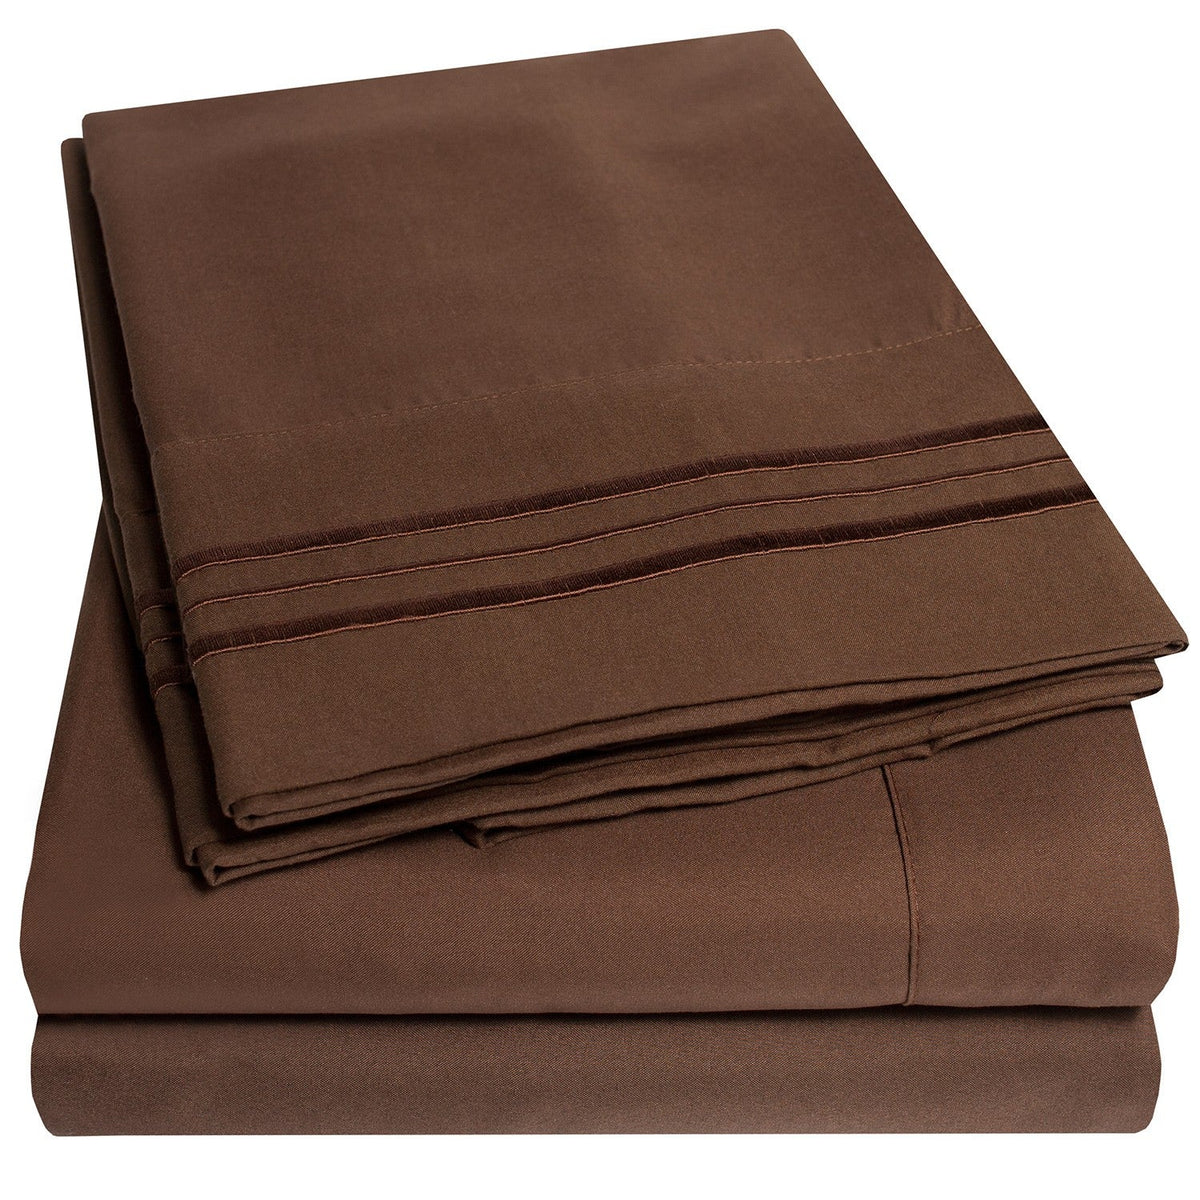 Classic 4-Piece Bed Sheet Set (Chocolate) - Folded